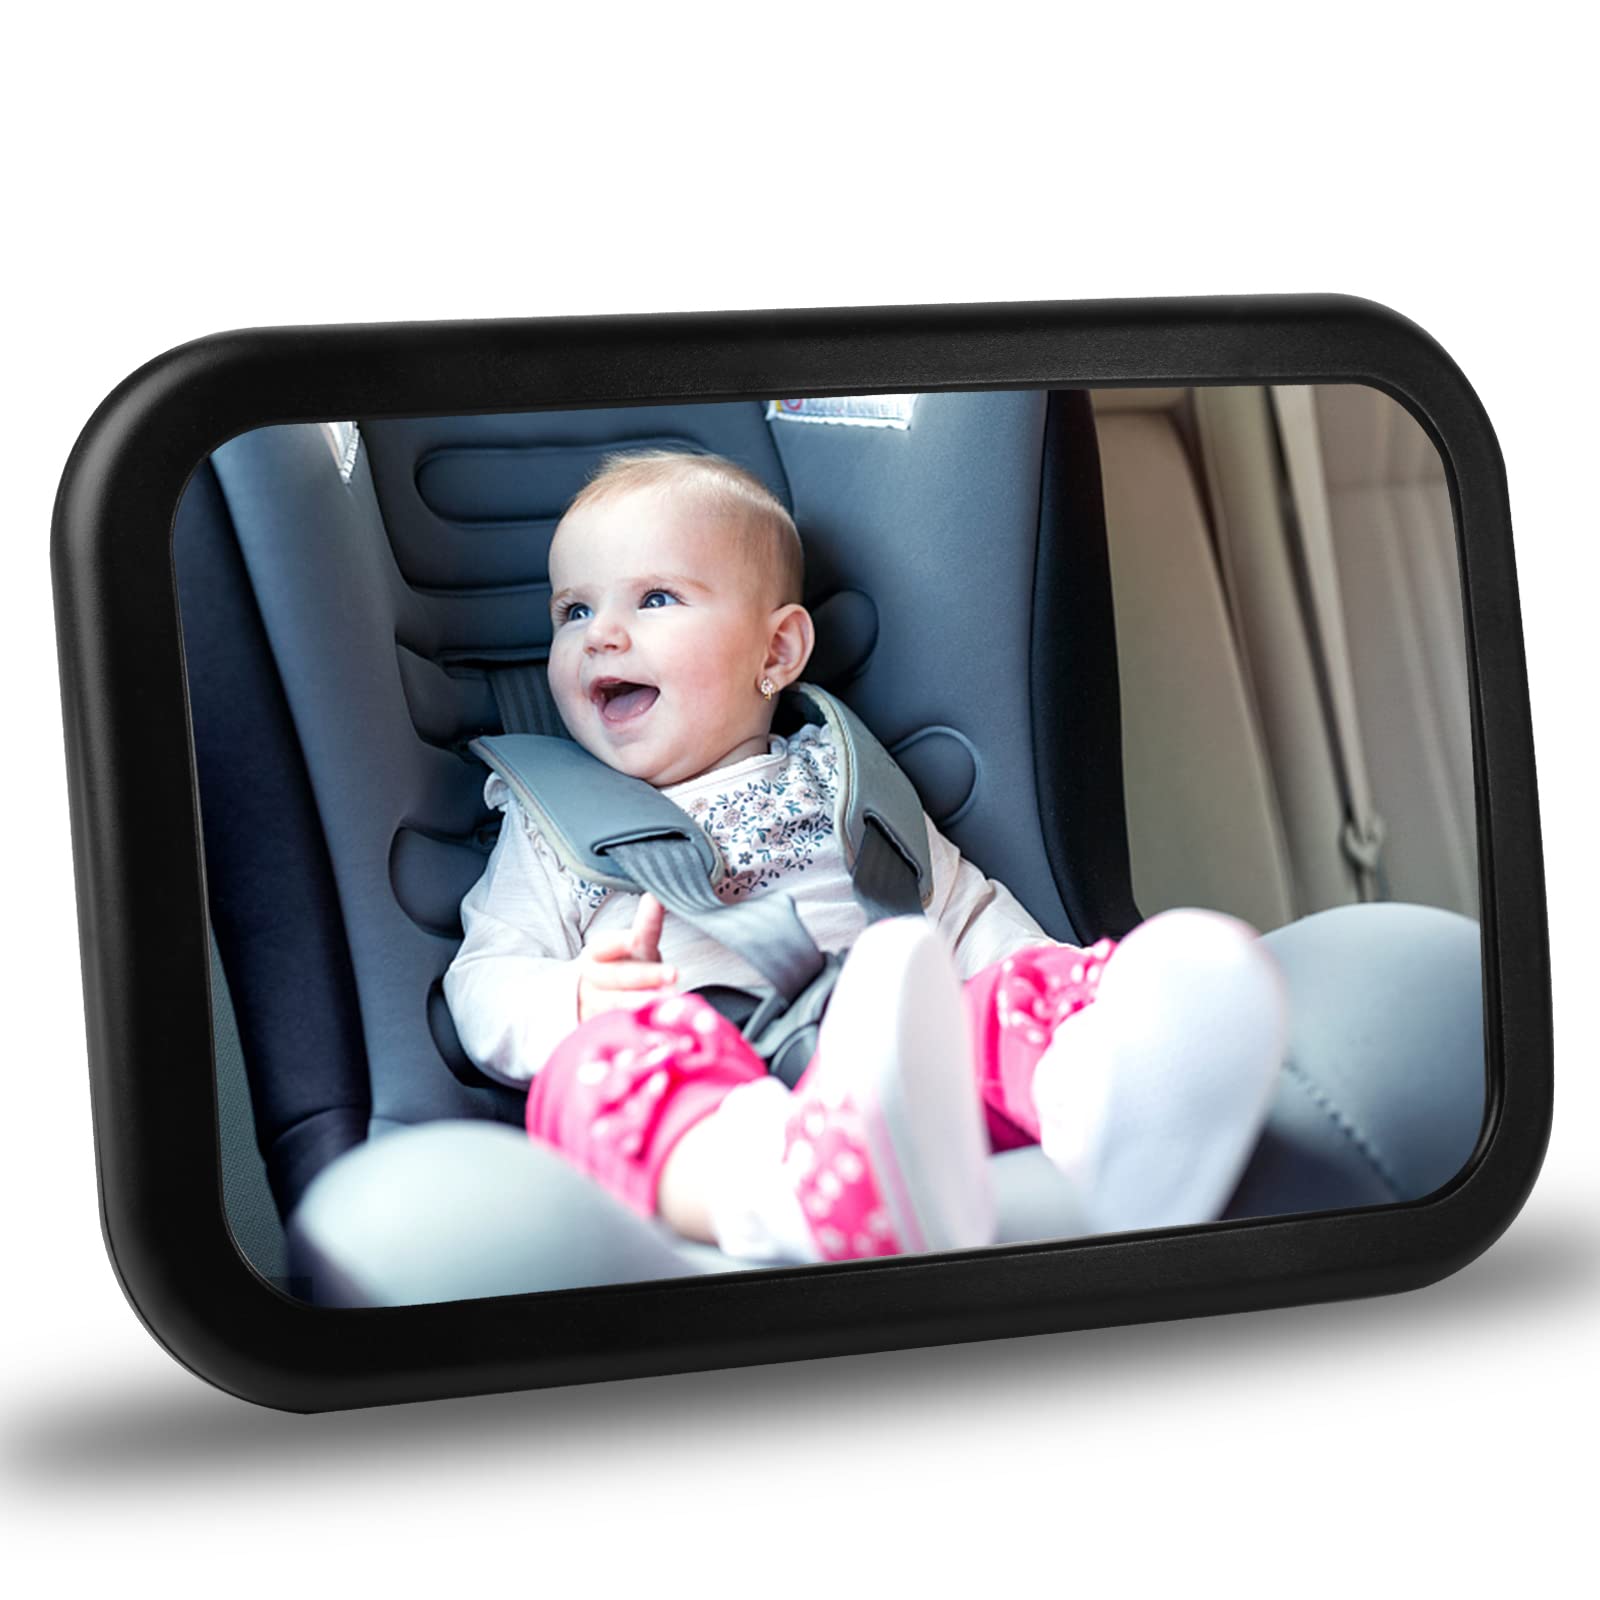 Baby Mirror for Car - Largest and Most Stable Backseat Mirror with Premium  Matte Finish - Crystal Clear View of Infant in Rear Facing Car Seat - Safe